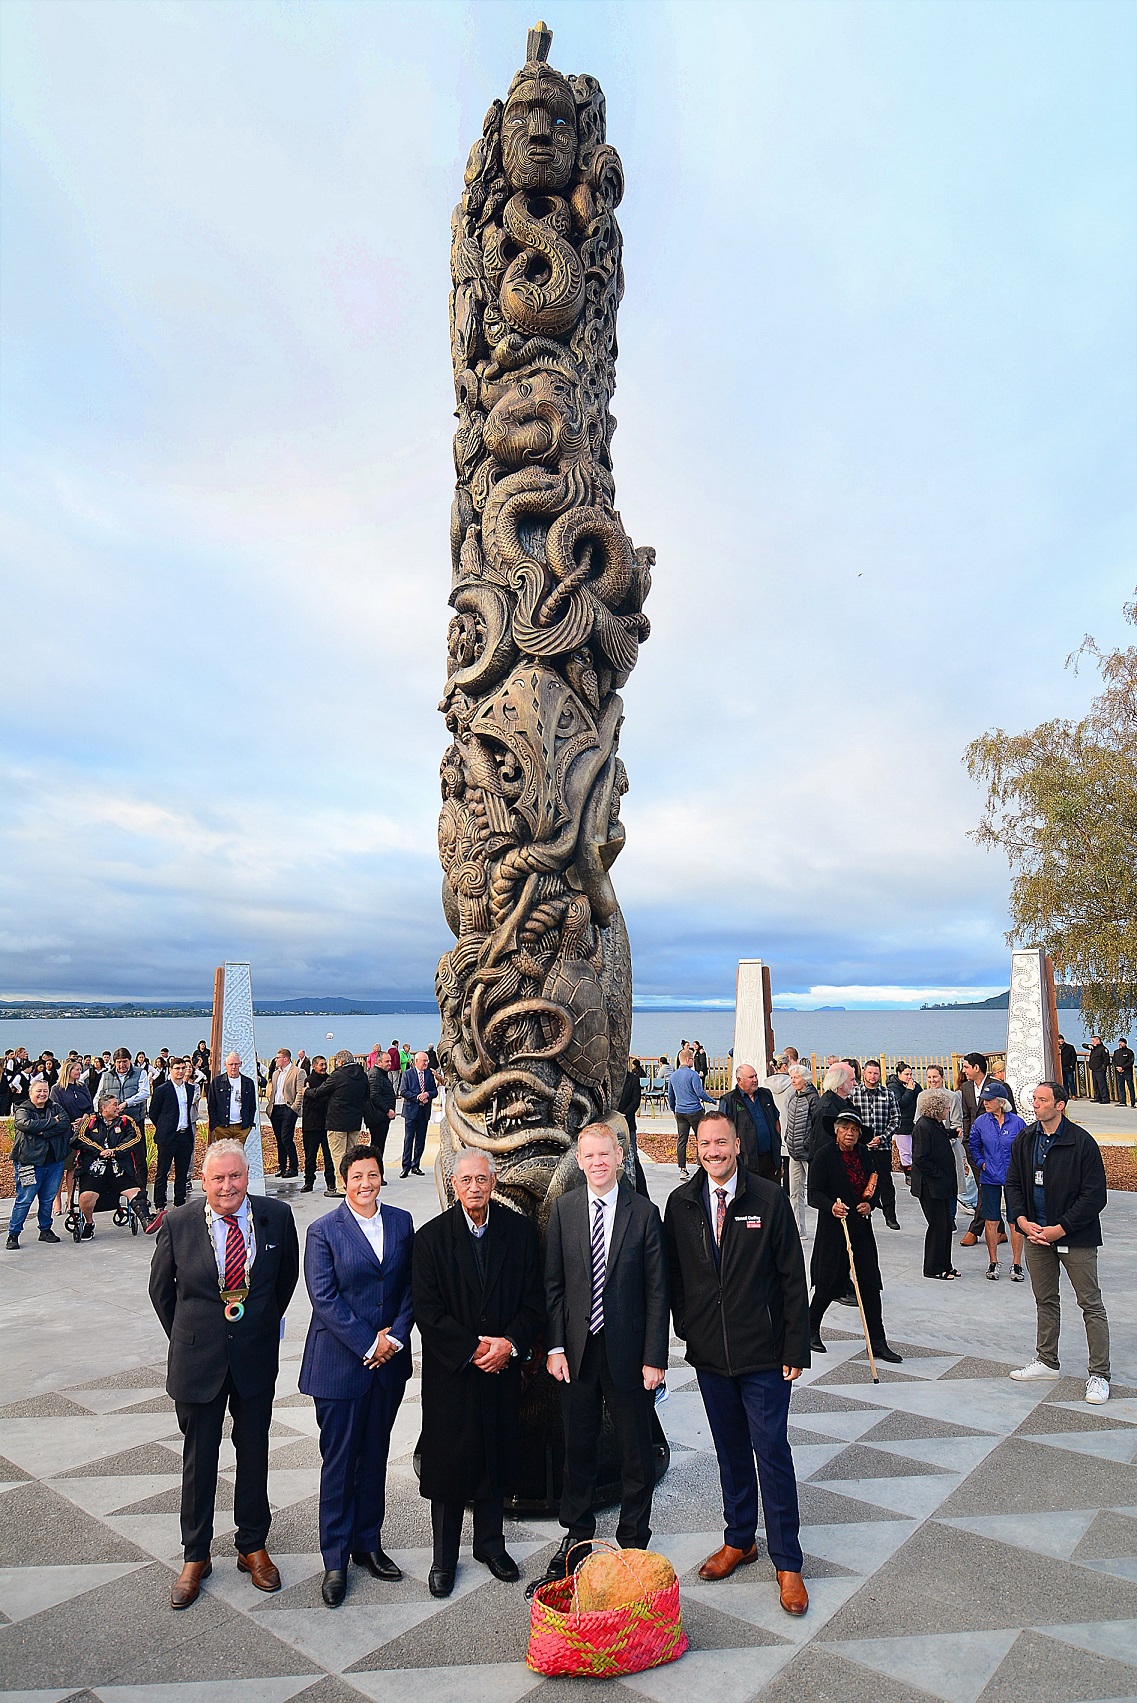 Mayor and dignitaries pictured in the new Taupo Atea space